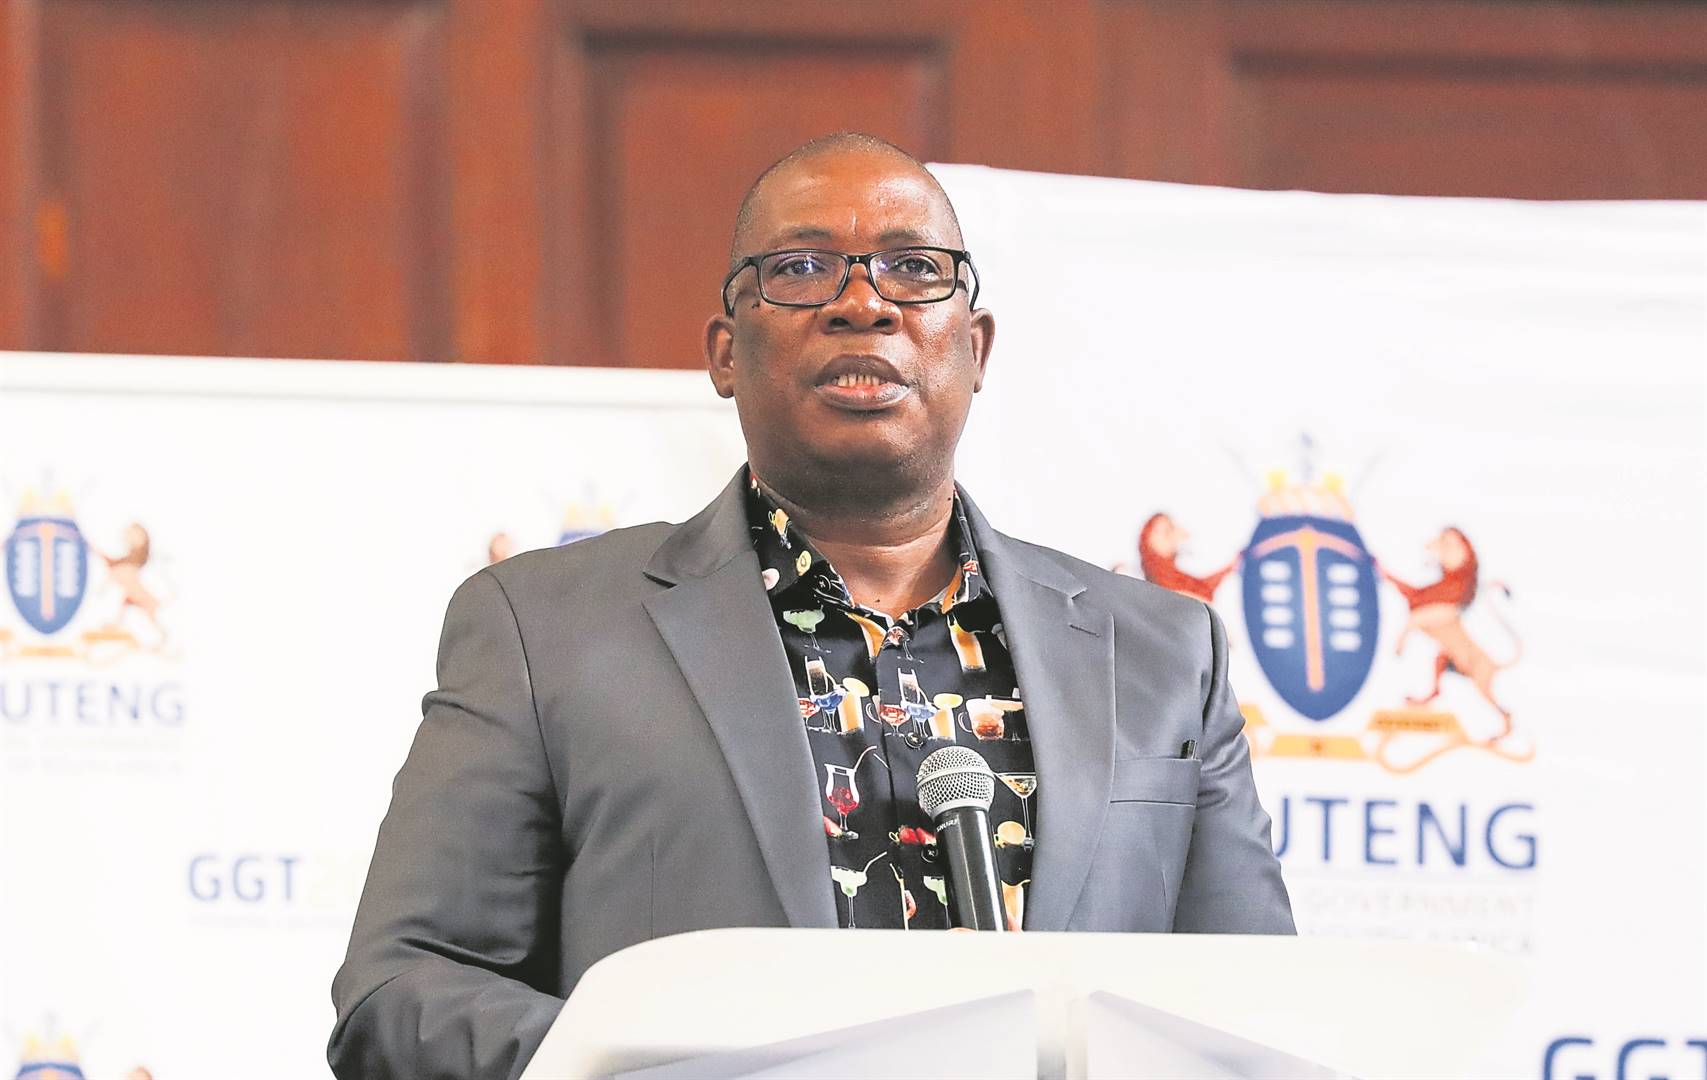 Lesufi’s Nasi iSpani youth recruitment programme was one of the party’s initiatives that aimed to upskill and uplift about 500,000 young, unemployed people